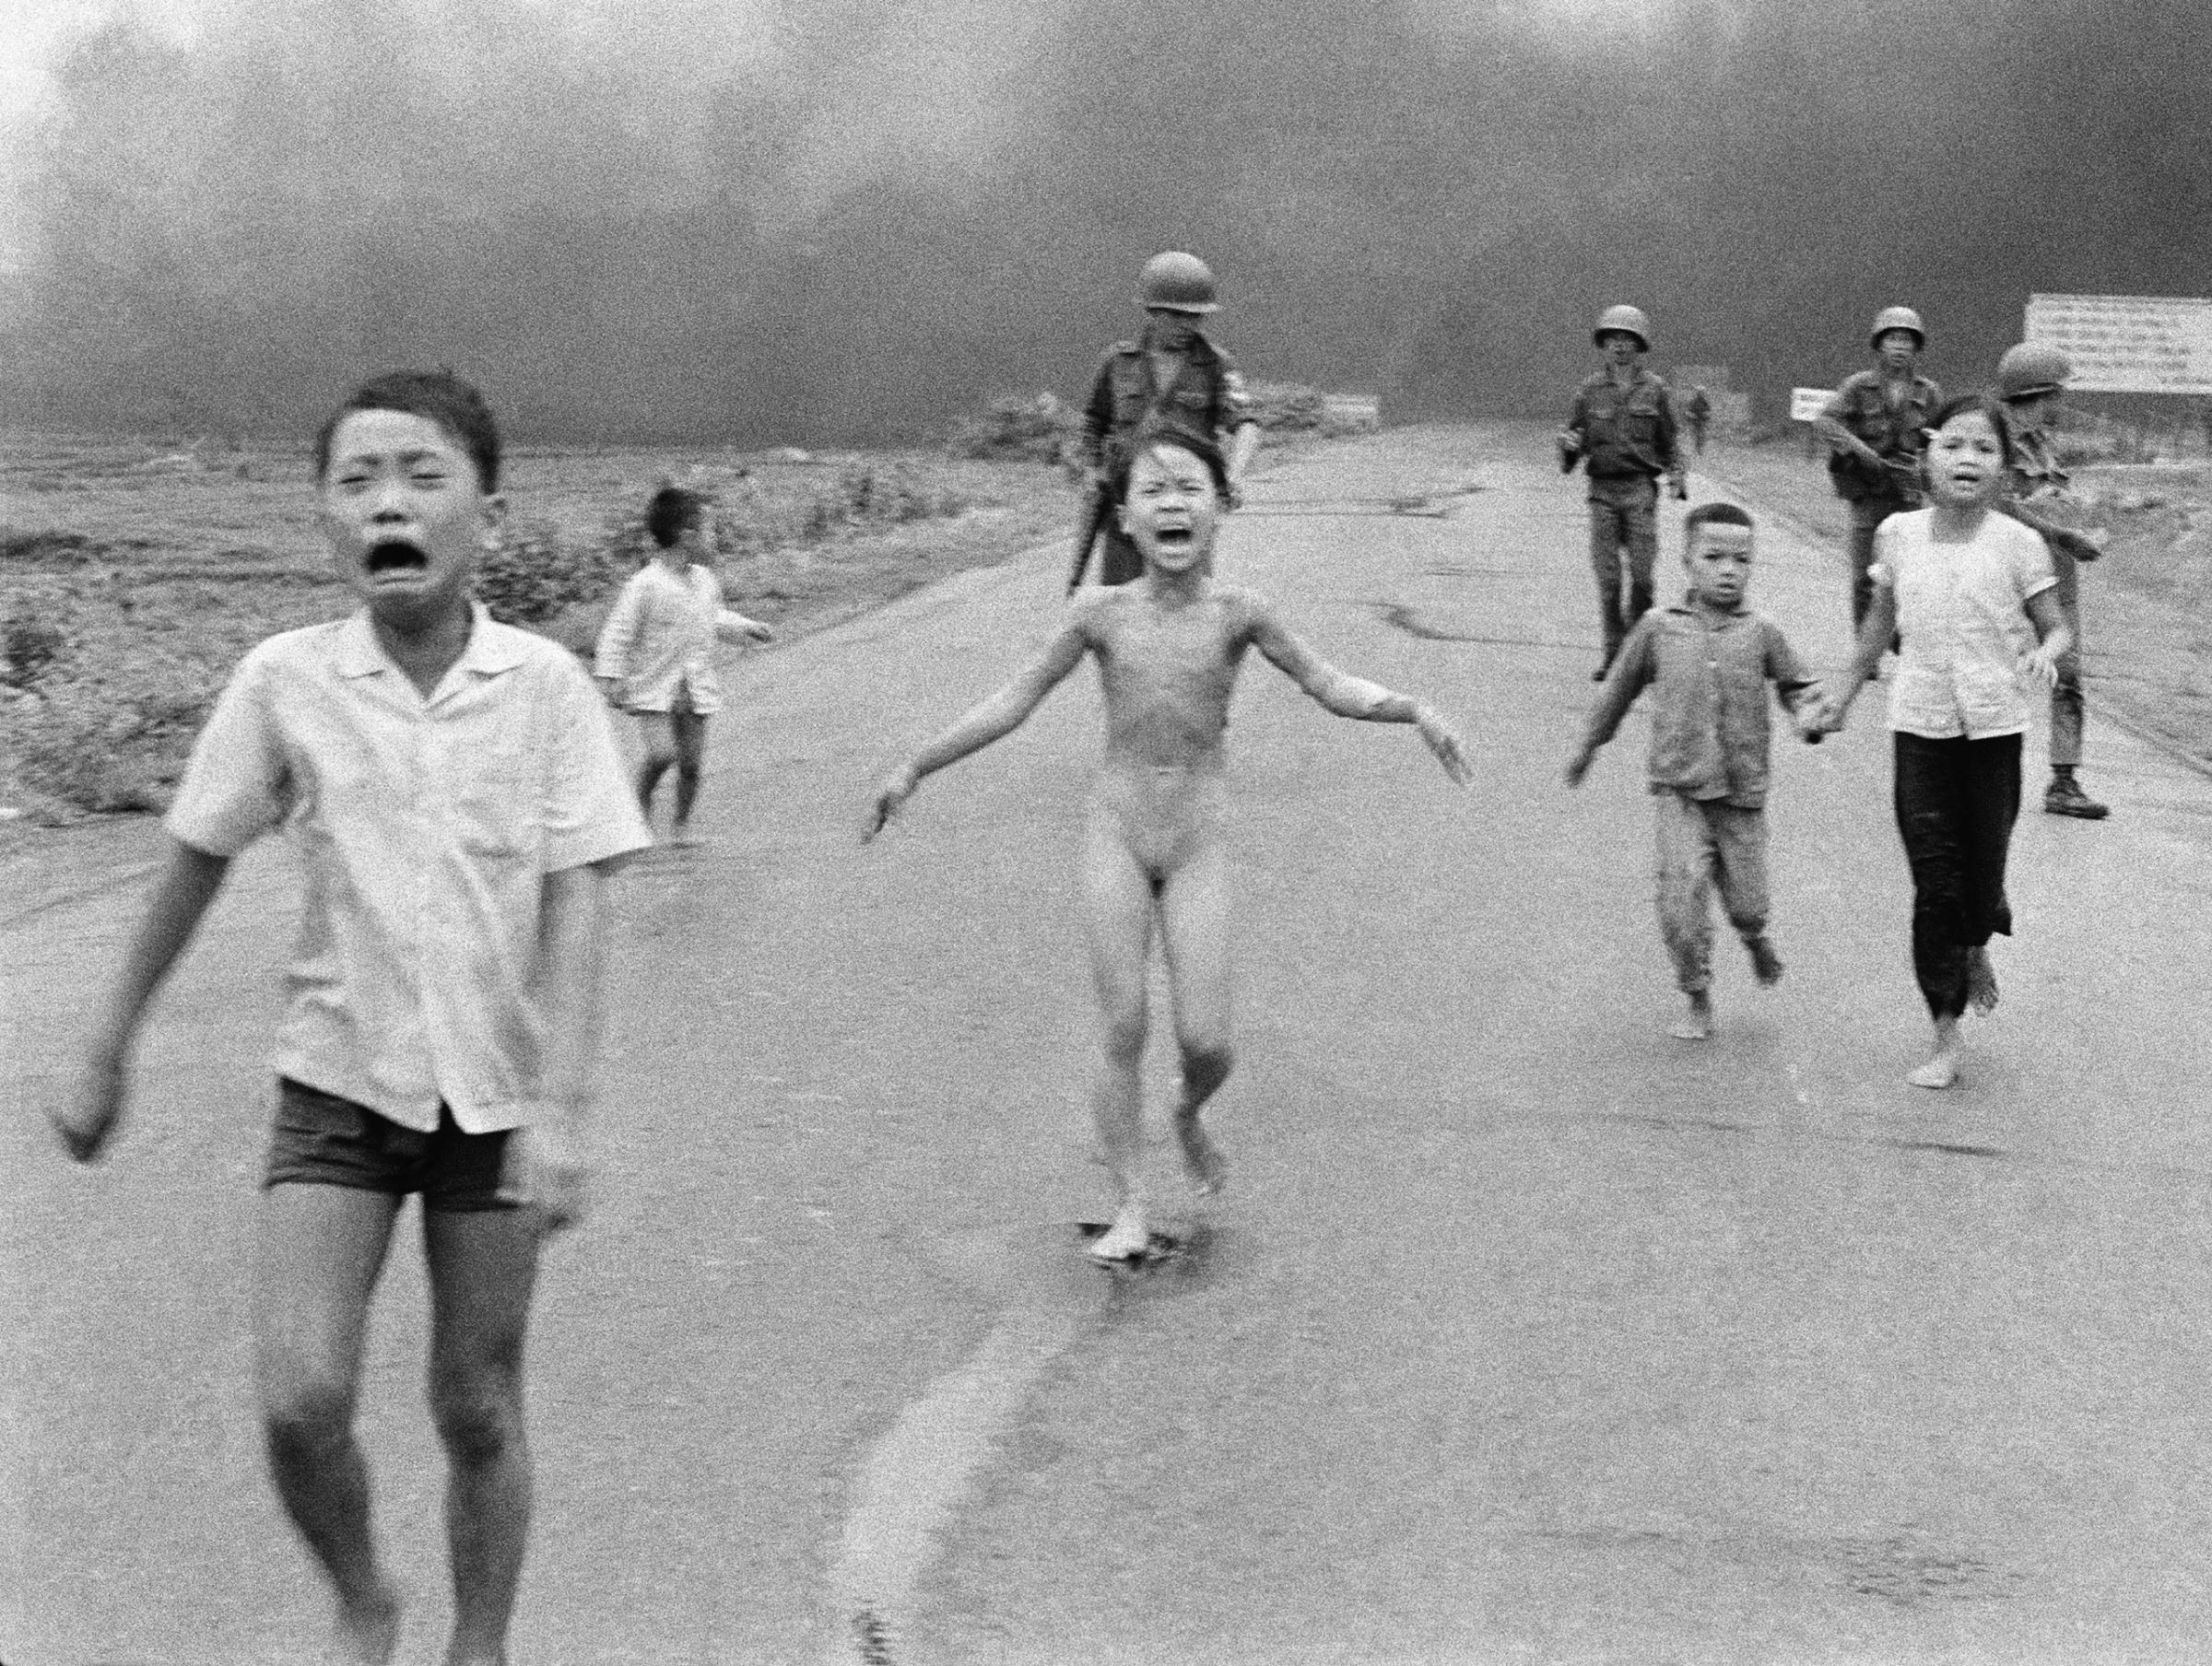 South Vietnamese forces follow after terrified children, including 9-year-old Kim Phuc, center, as they run down Route 1 near Trang Bang after an aerial napalm attack on suspected Viet Cong hiding places on June 8, 1972.